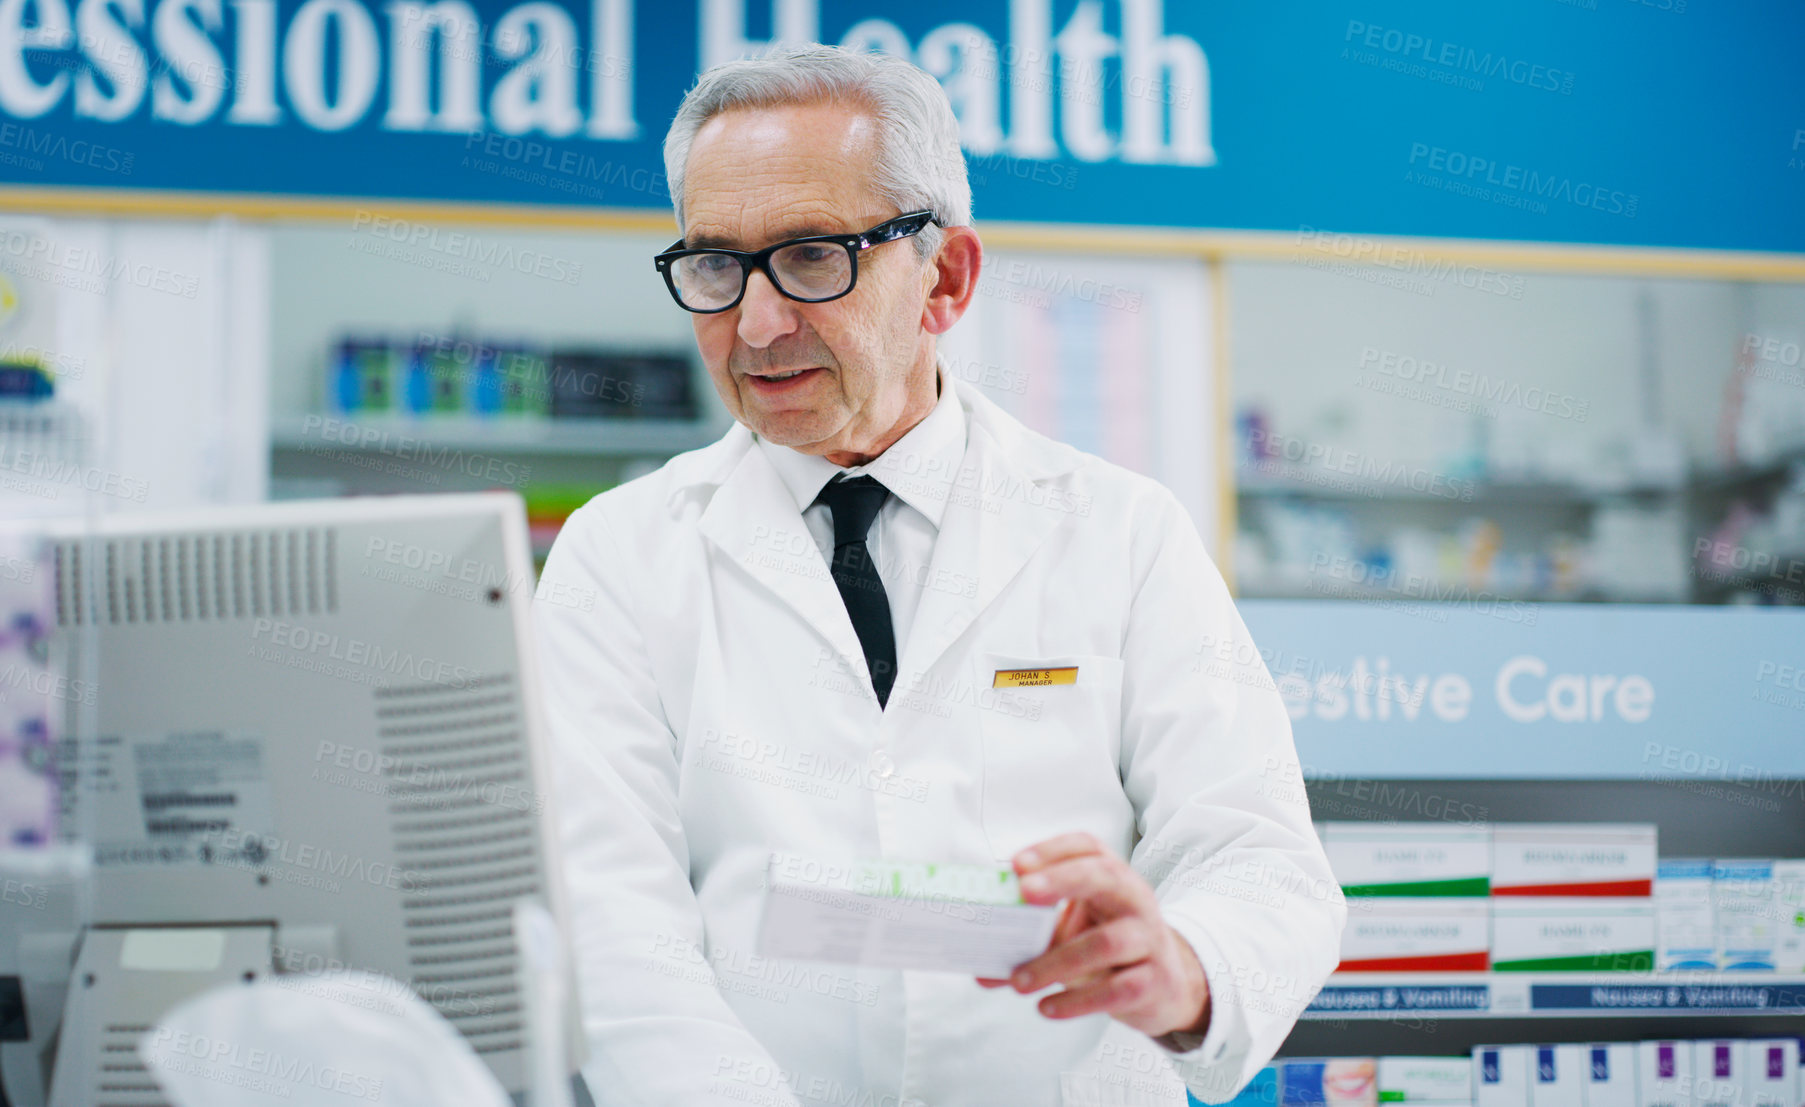 Buy stock photo Pharmacy product, cash register and senior man process sale of pharmaceutical, supplements or pills box. Retail pharmacist, drug store medicine and medical person enter prescription package data